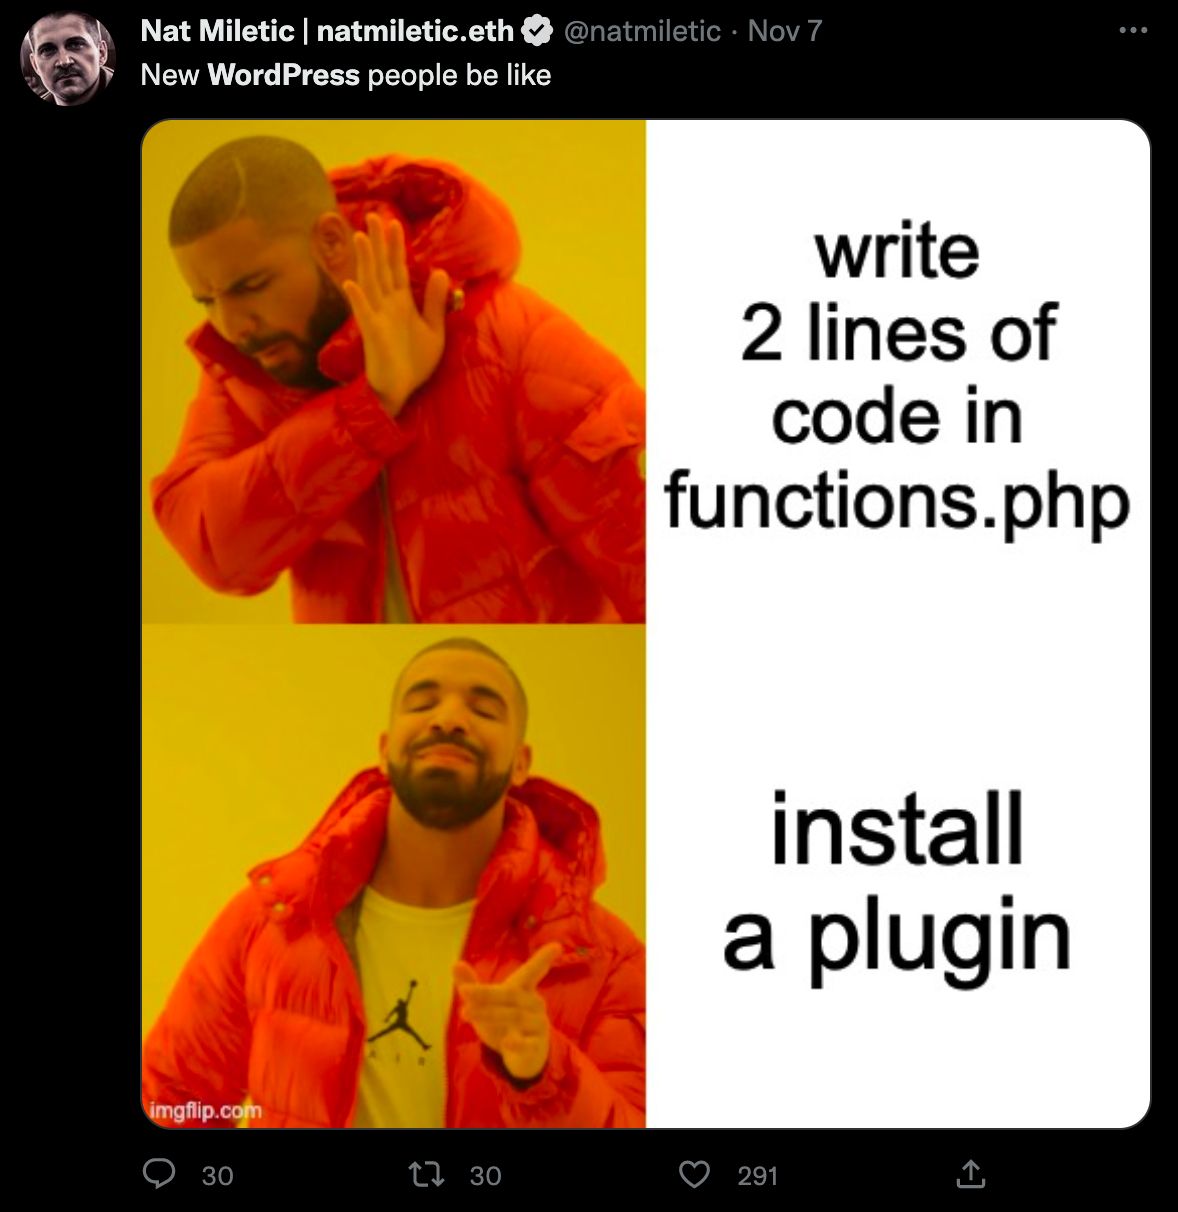 Nat Miletic's post which reads "New WordPress people be like" and shows an image of the Drake reject meme with the text "write 2 lines of code in functions.php" and the Drake approve meme image next to the text "Install a plugin"